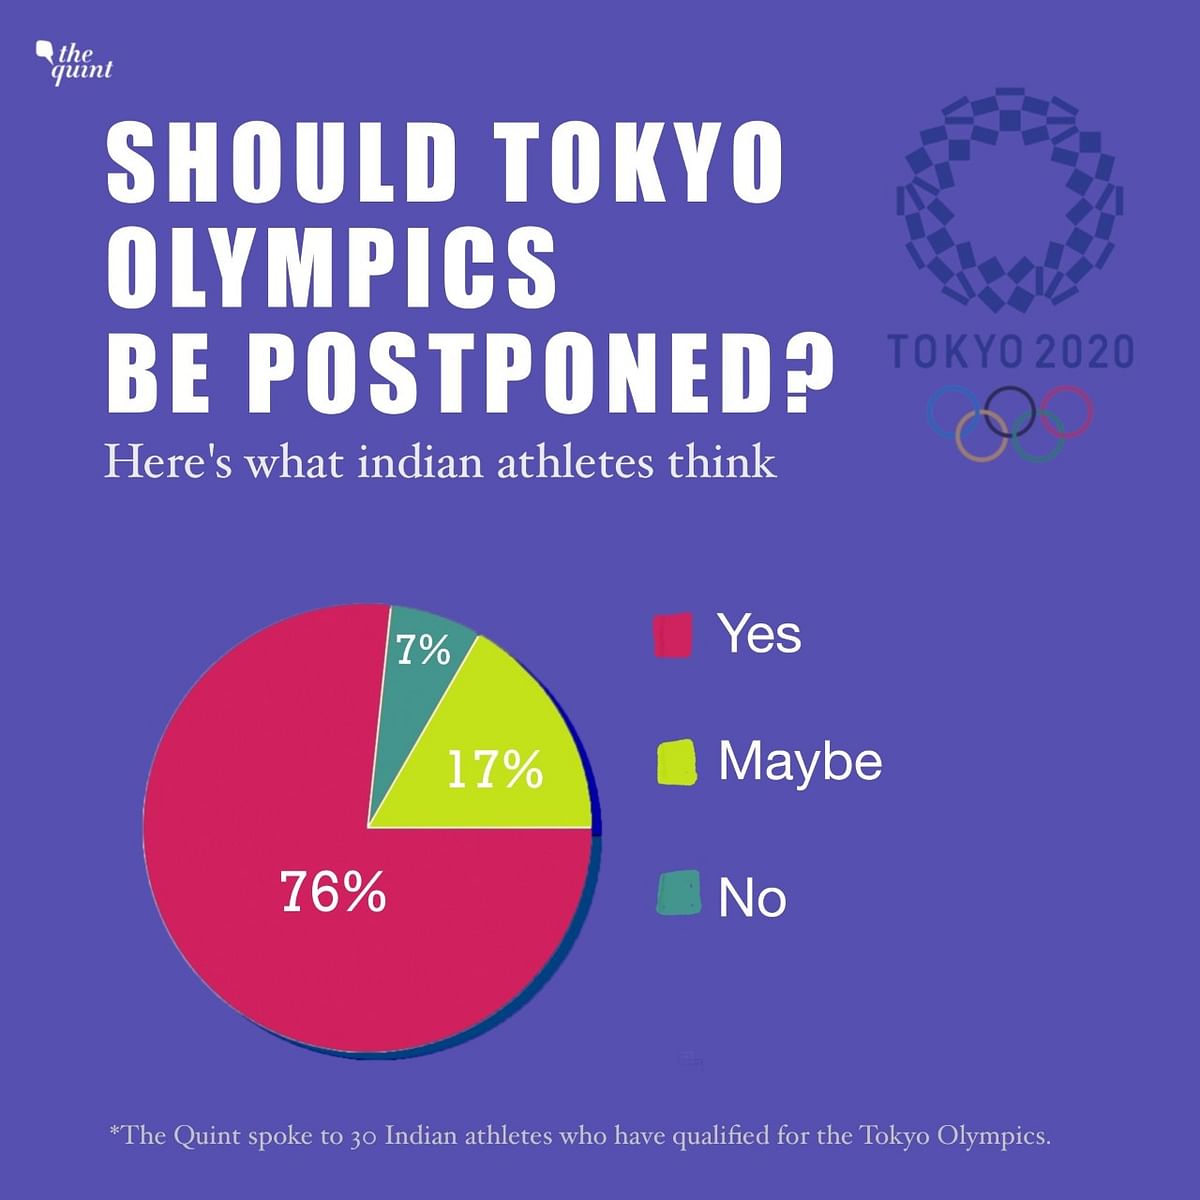 Should the Tokyo Olympics be postponed? The Quint asks Indian athletes who have qualified for the Games.